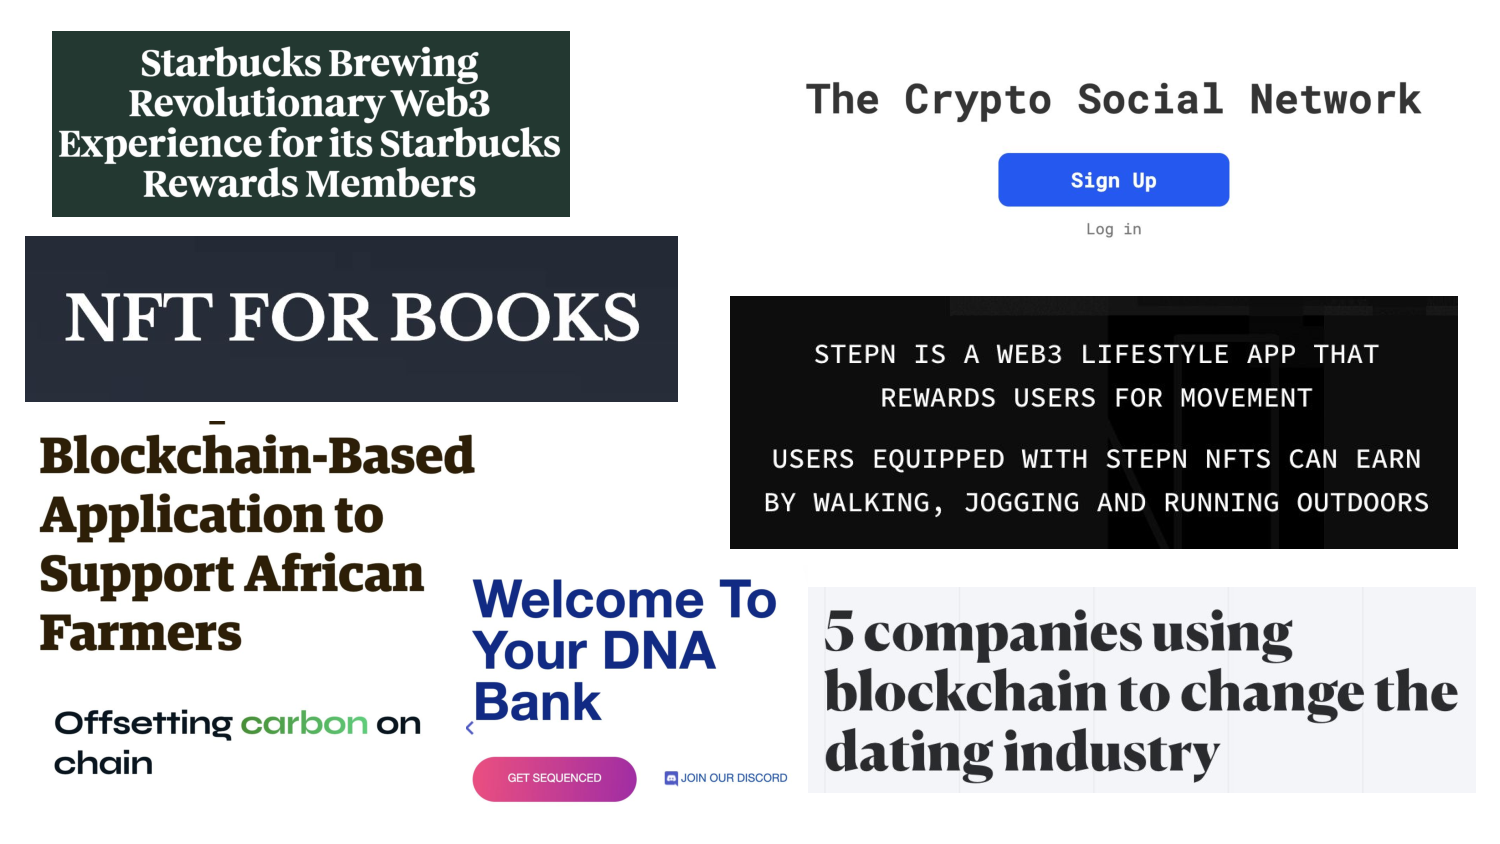 Collage of screenshots of various headlines and advertisements for web3 projects. 'Starbucks brewing revolutionary web3 experience for its Starbucks rewards members'. 'The crypto social network'. 'NFT for books'. 'Stepn is a web3 lifestyleapp that rewards users for movement. Users equipped with Stepn NFTs can earn by walking, jogging and running outdoors'. 'Blockchain-based application to support African farmers'. 'Welcome to your DNA bank'. 'Offsetting carbon on chain'. '5 companies using blockchain to change the dating industry'.